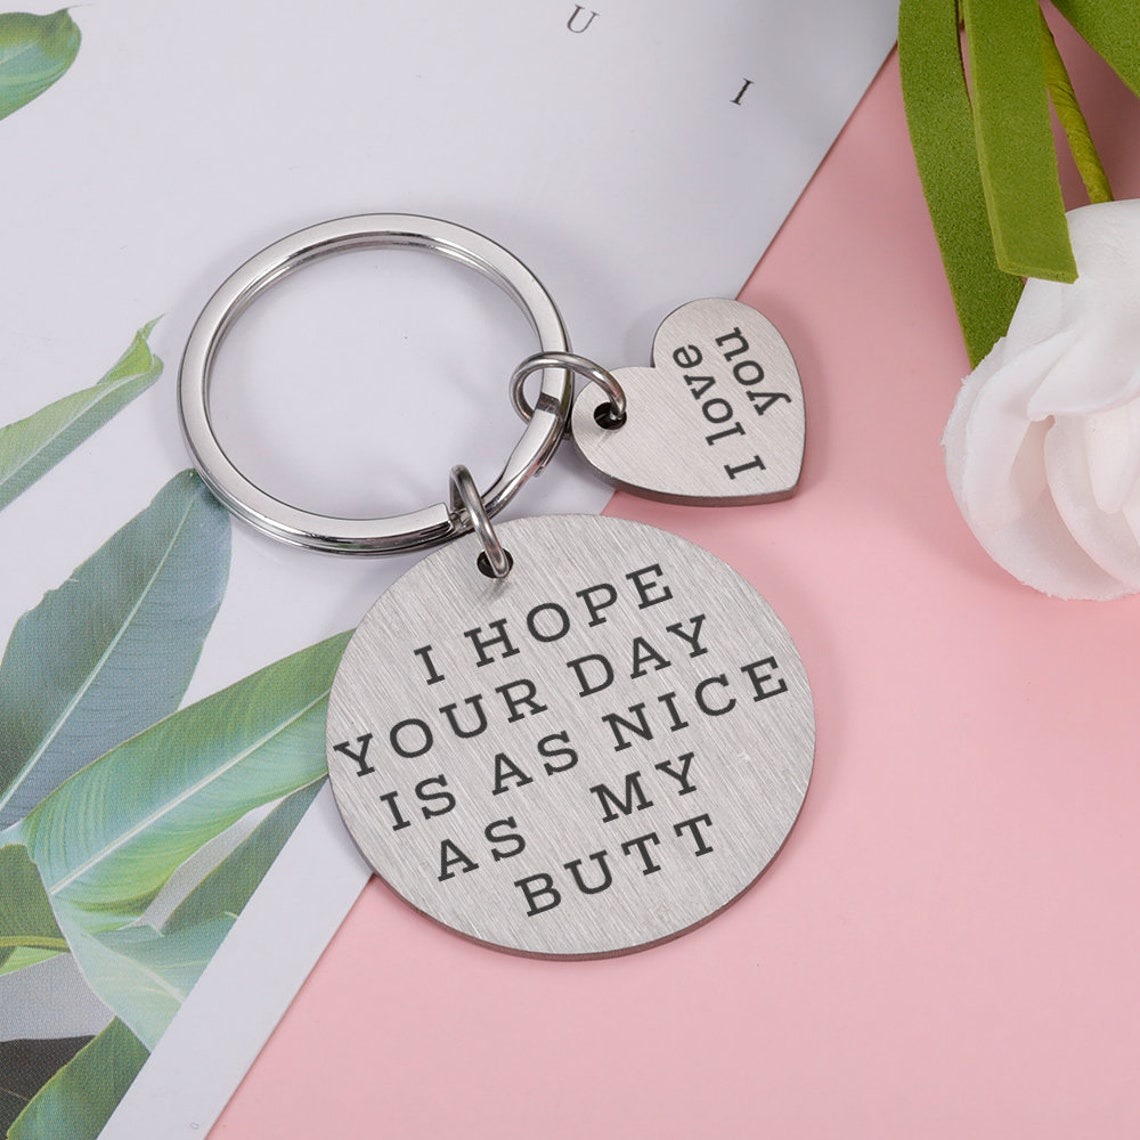 Funny Key chain- I Hope Your Day Is As Nice As My Butt